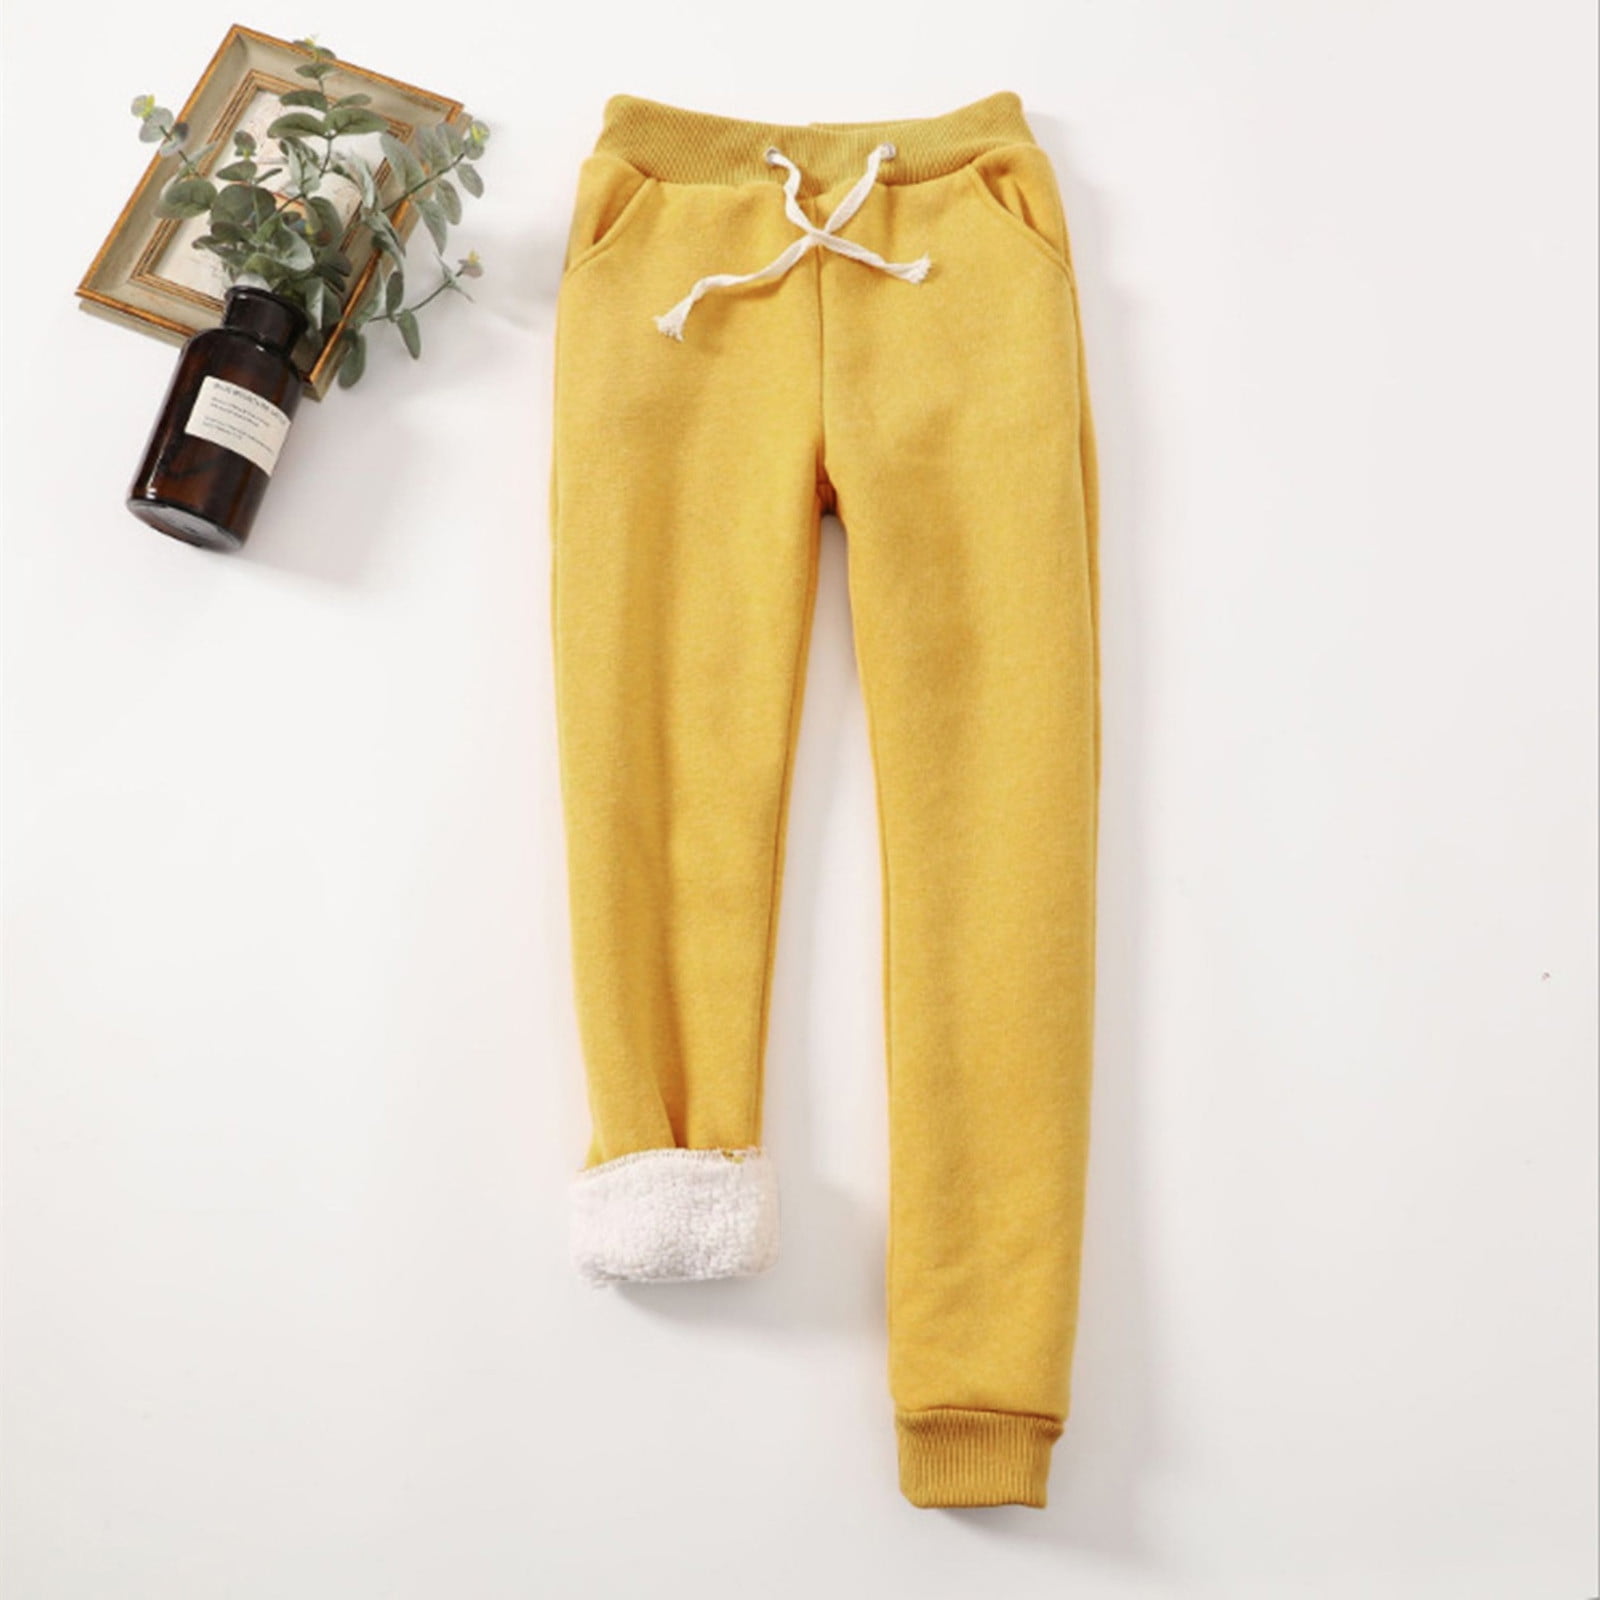 MRULIC pants for women Women Winter Casual Solid Color Keep Warm Plus  Velvet Long Pants Trousers With Pockets Yellow + XL 